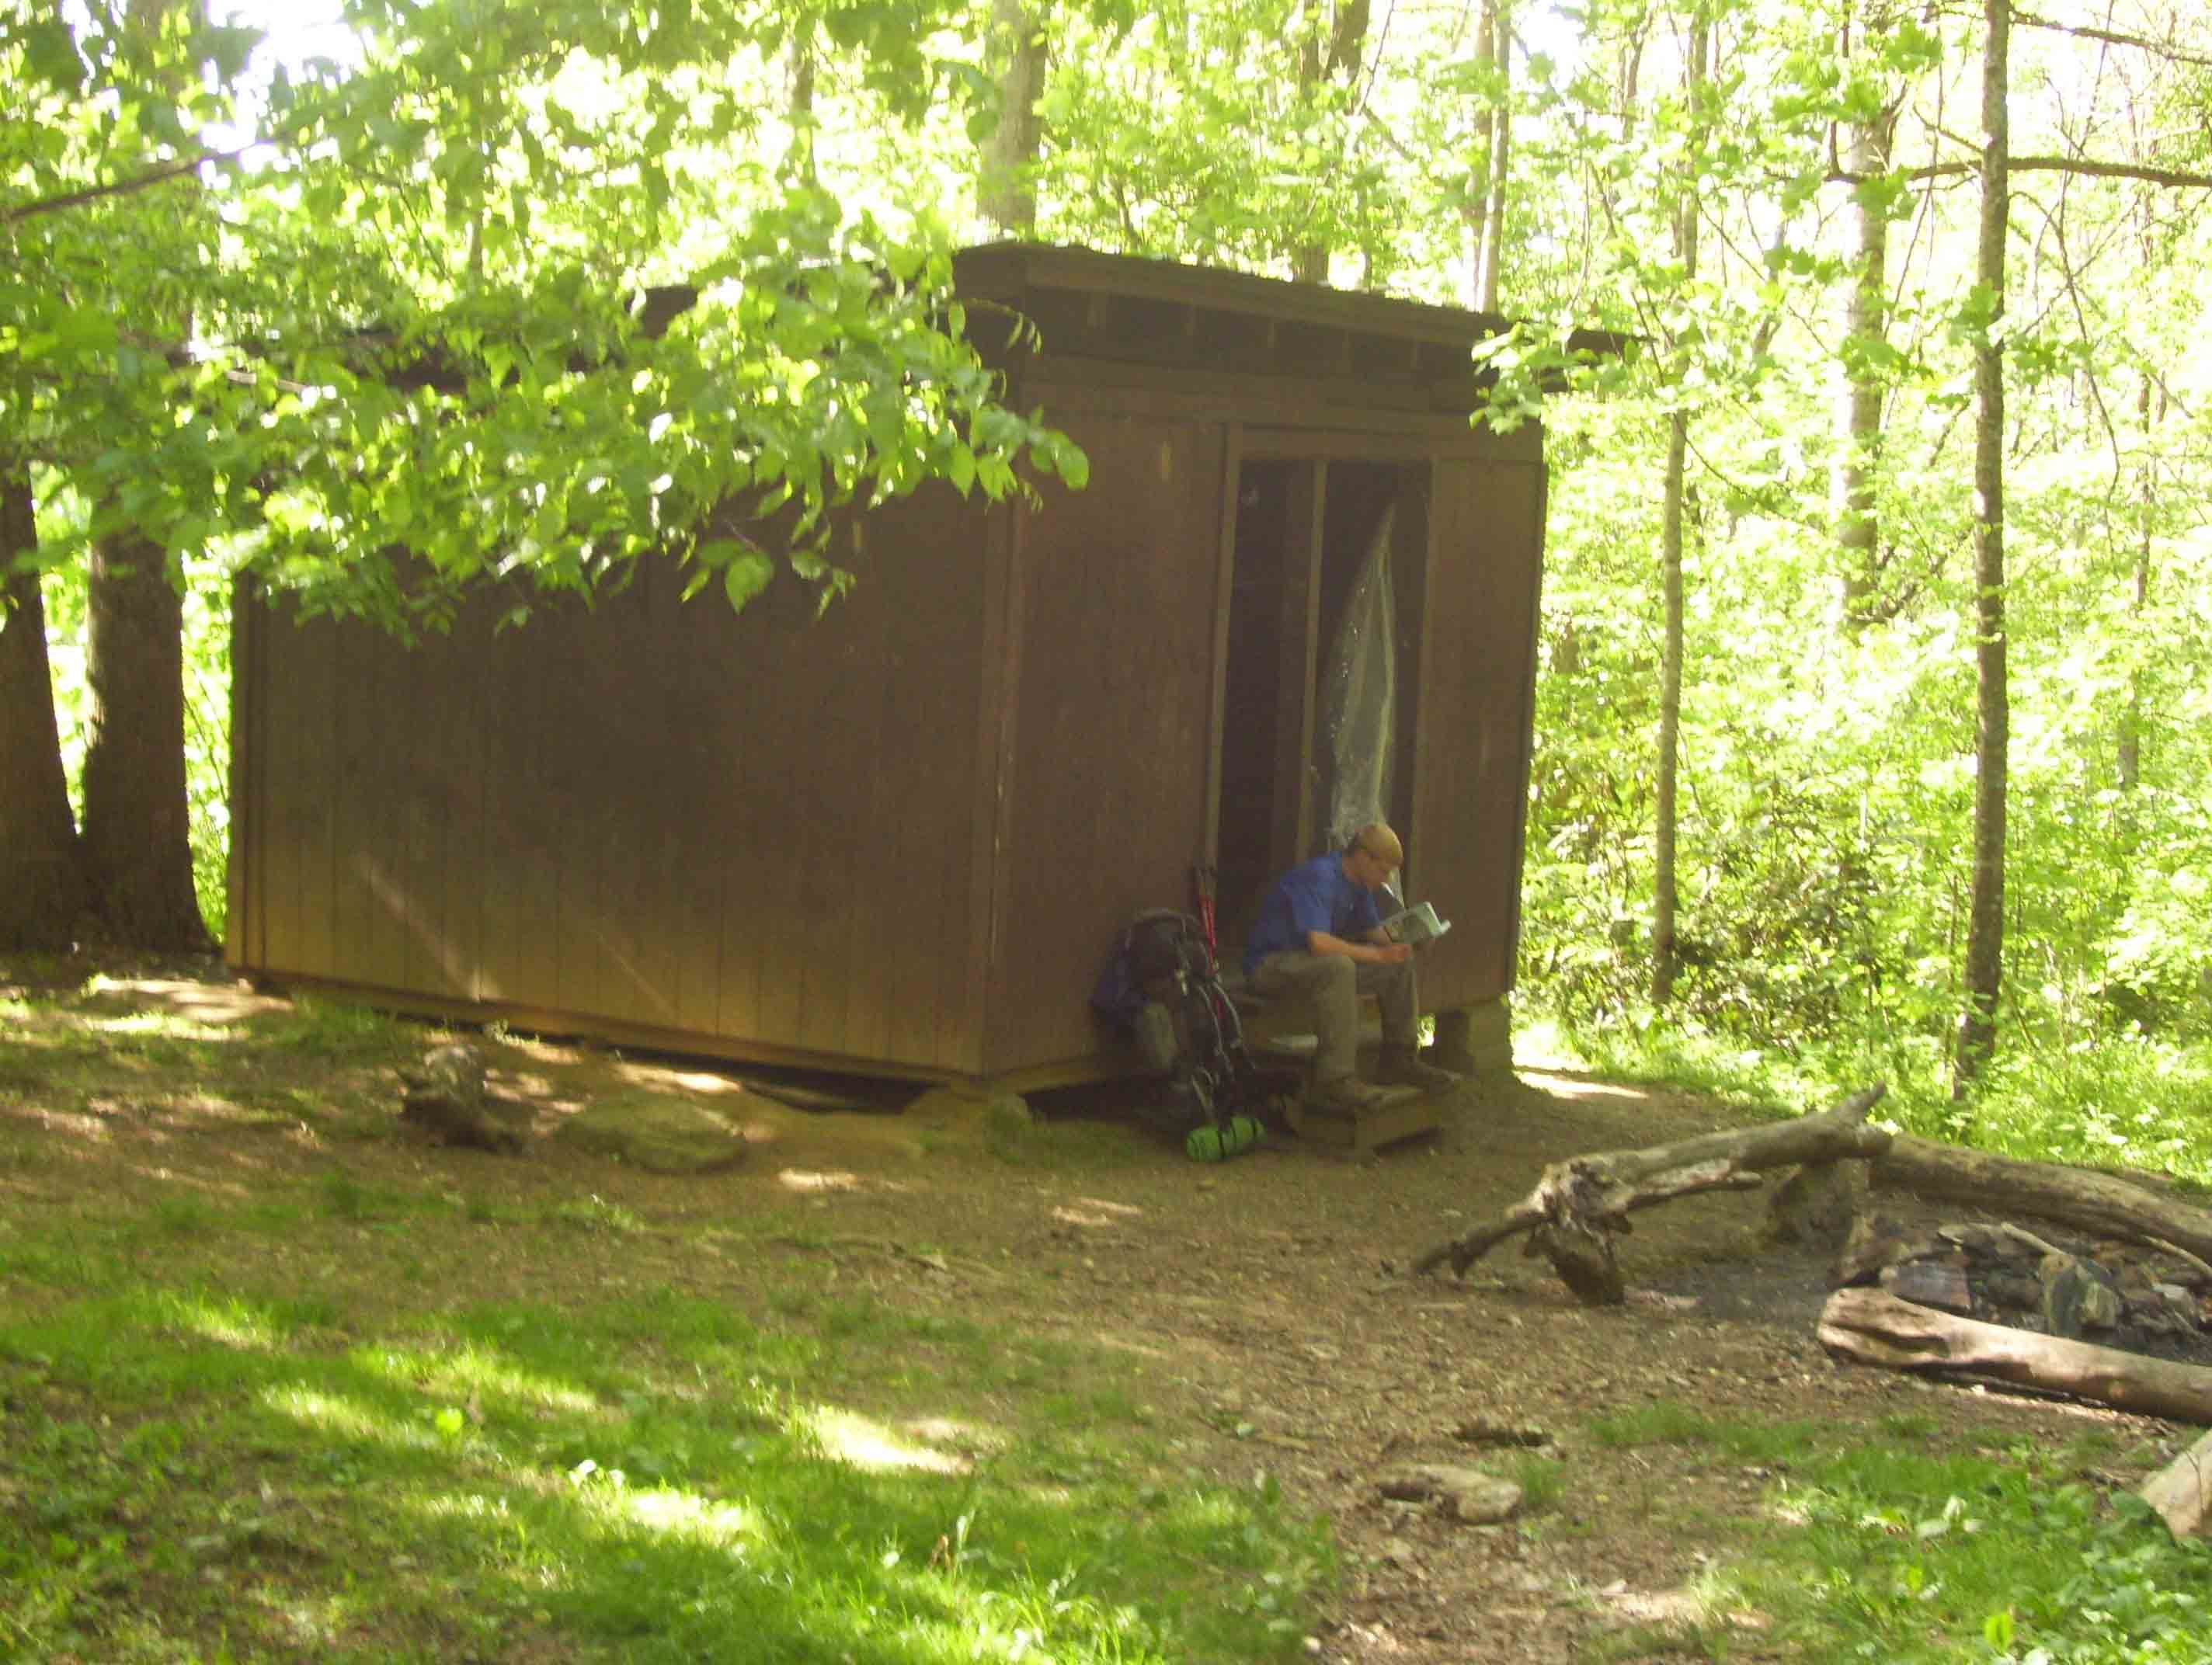 MM 0.5 Apple Orchard Shelter in 2008. The shelter has now been removed.  Courtesy dlcul@conncoll.edu